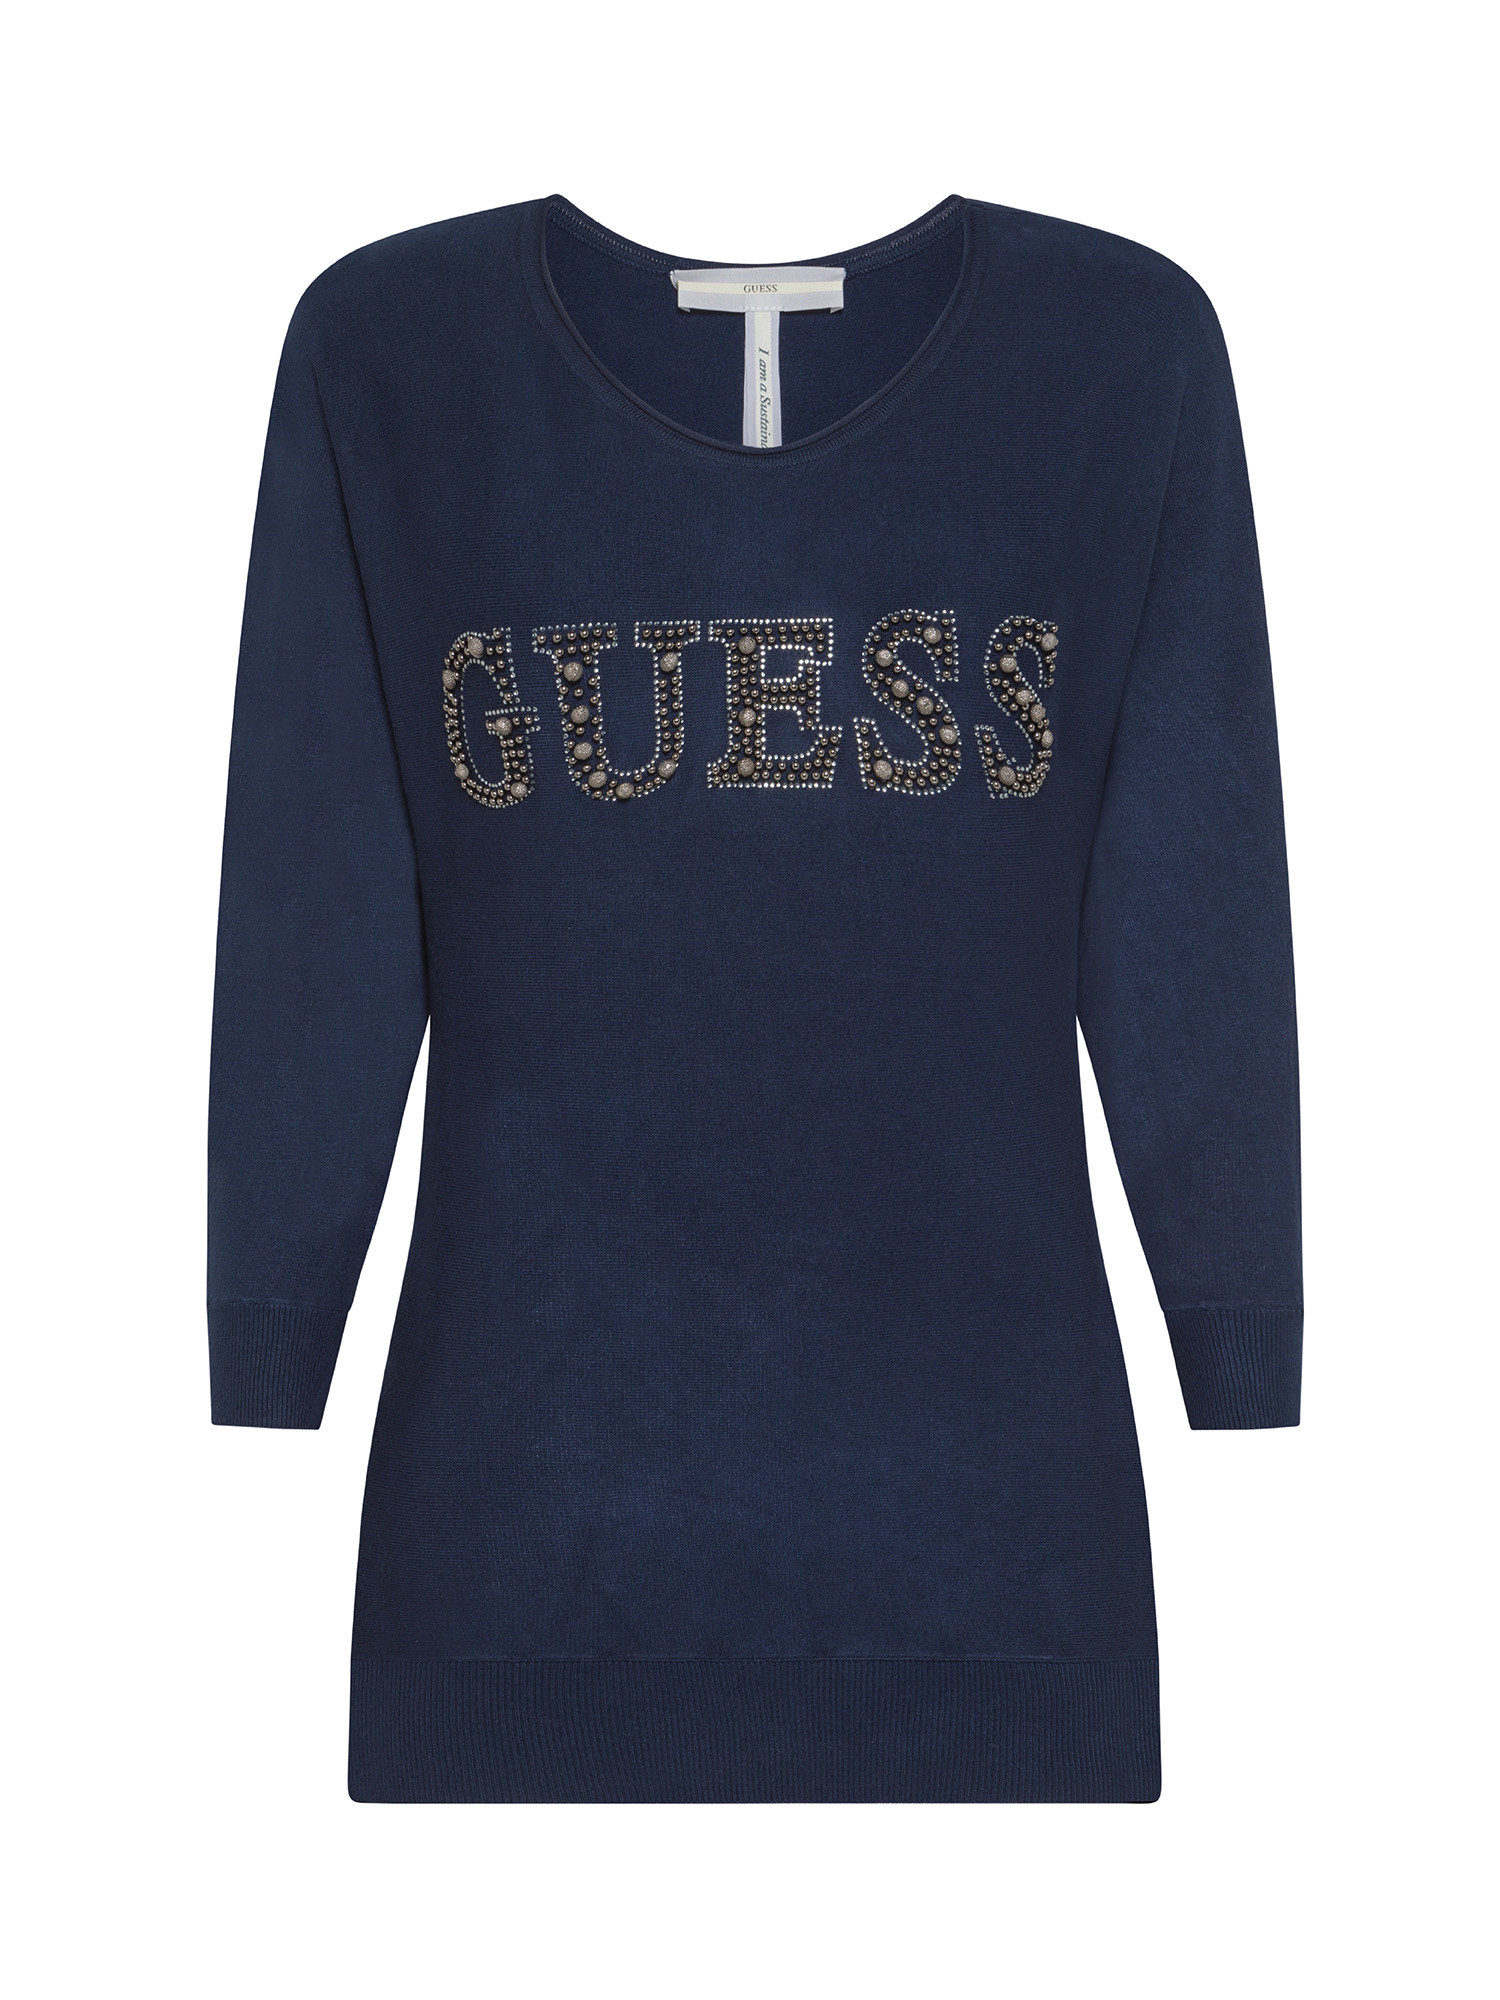 Guess - Maglione con logo con strass regular fit, Nero, large image number 0